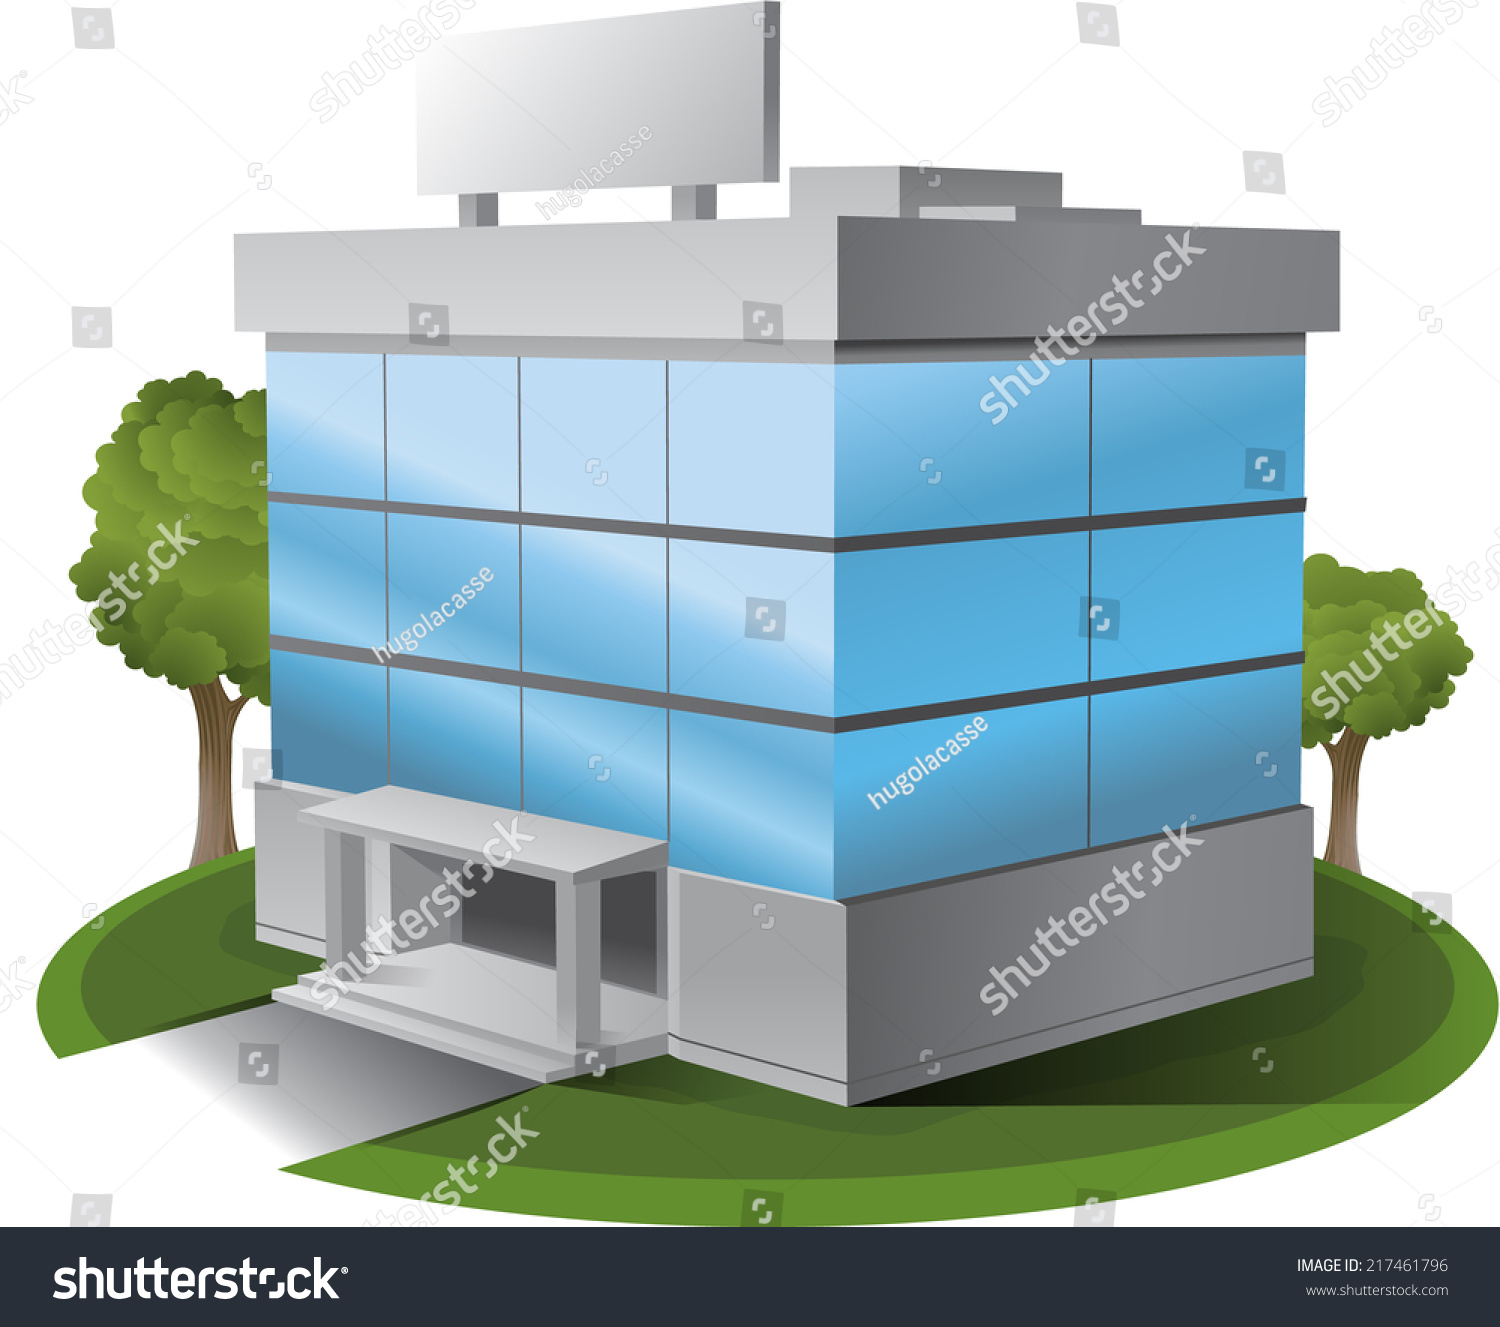 microsoft office clipart and stock images - photo #26